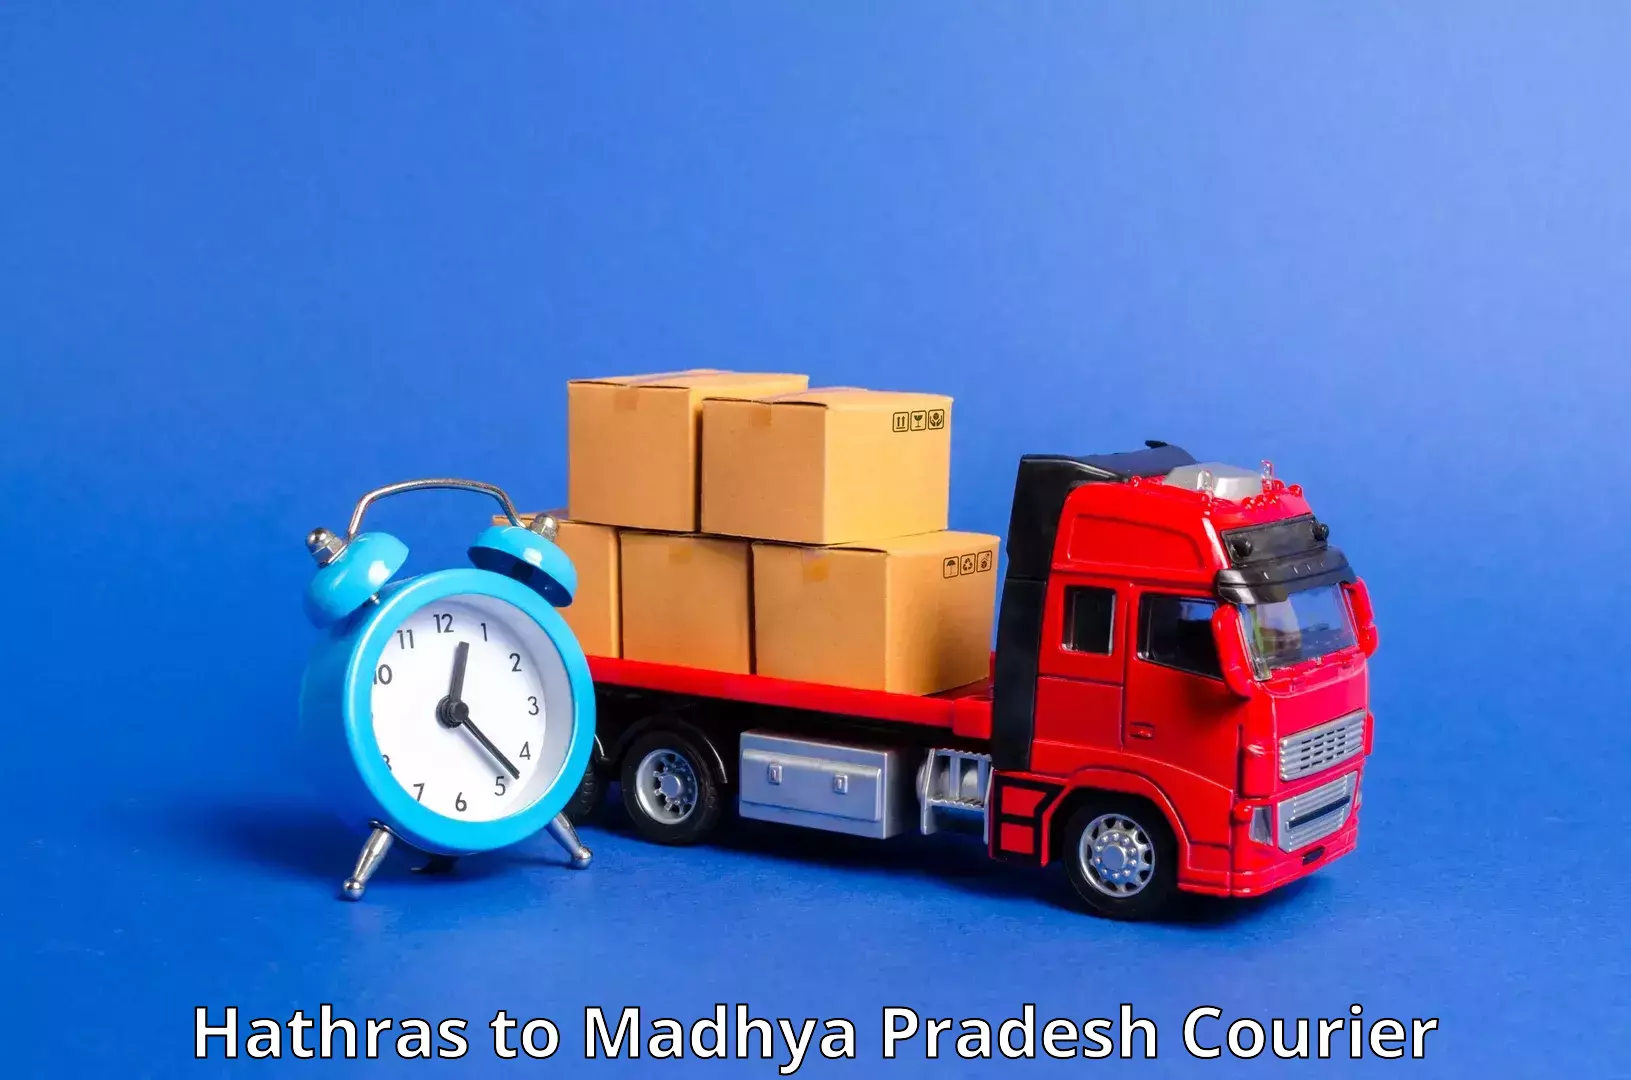 Multi-national courier services Hathras to Neemuch